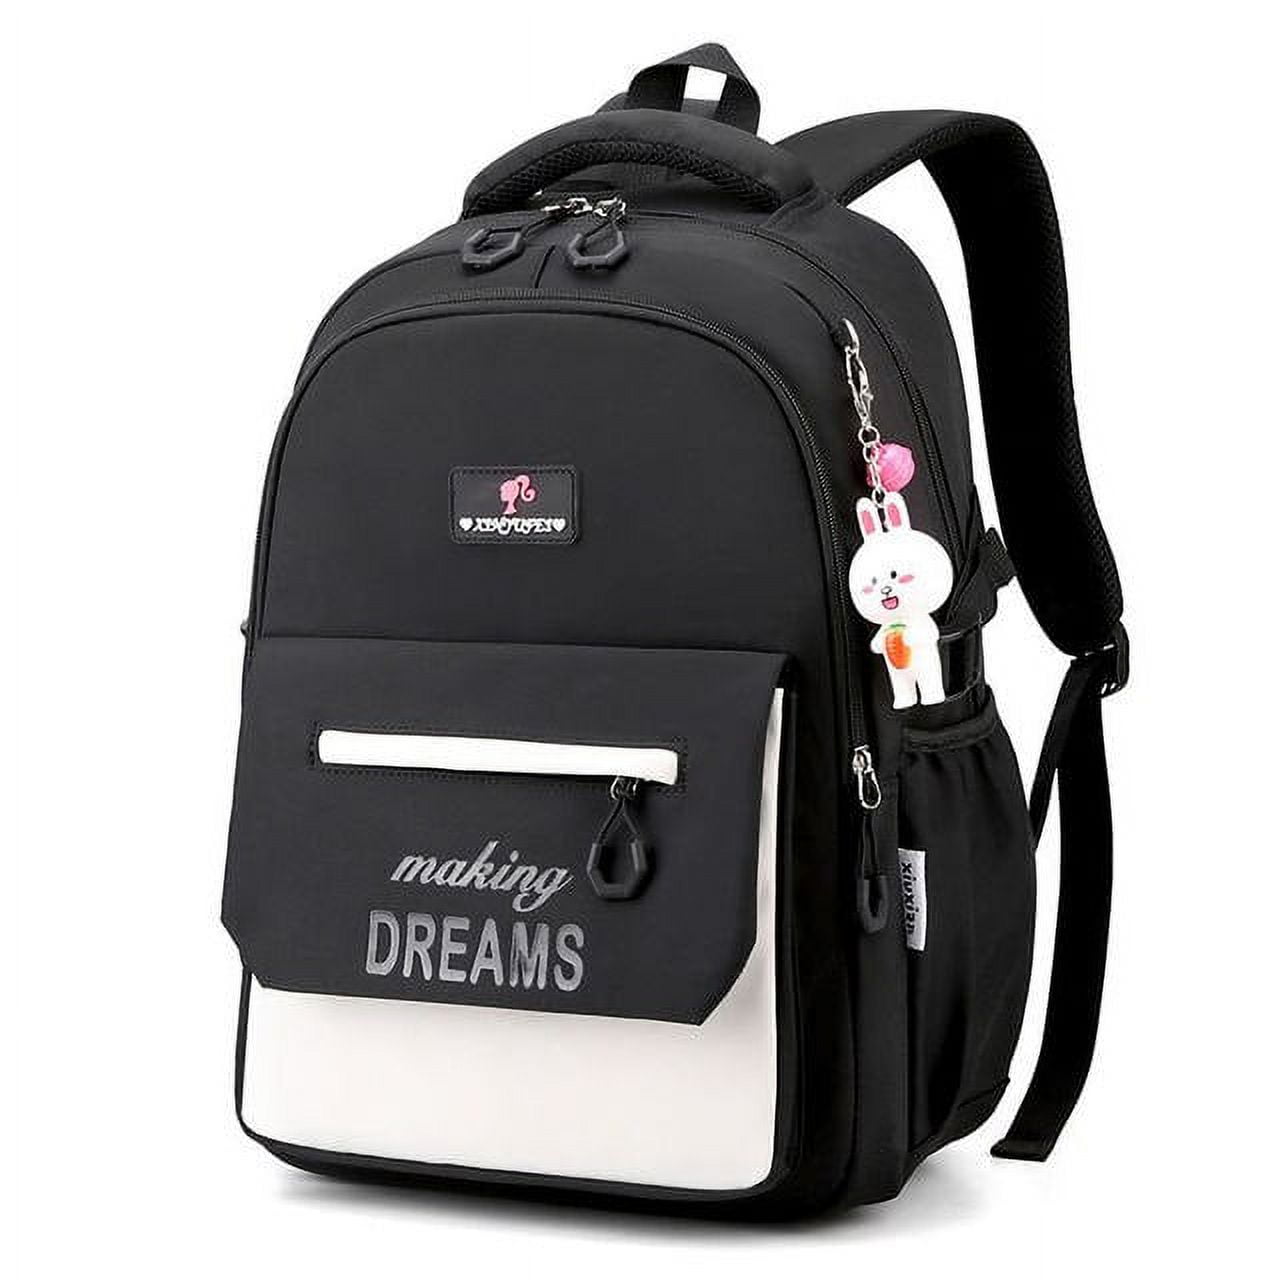 Primary School Bags For Girls Pink Cute Princess Middle School